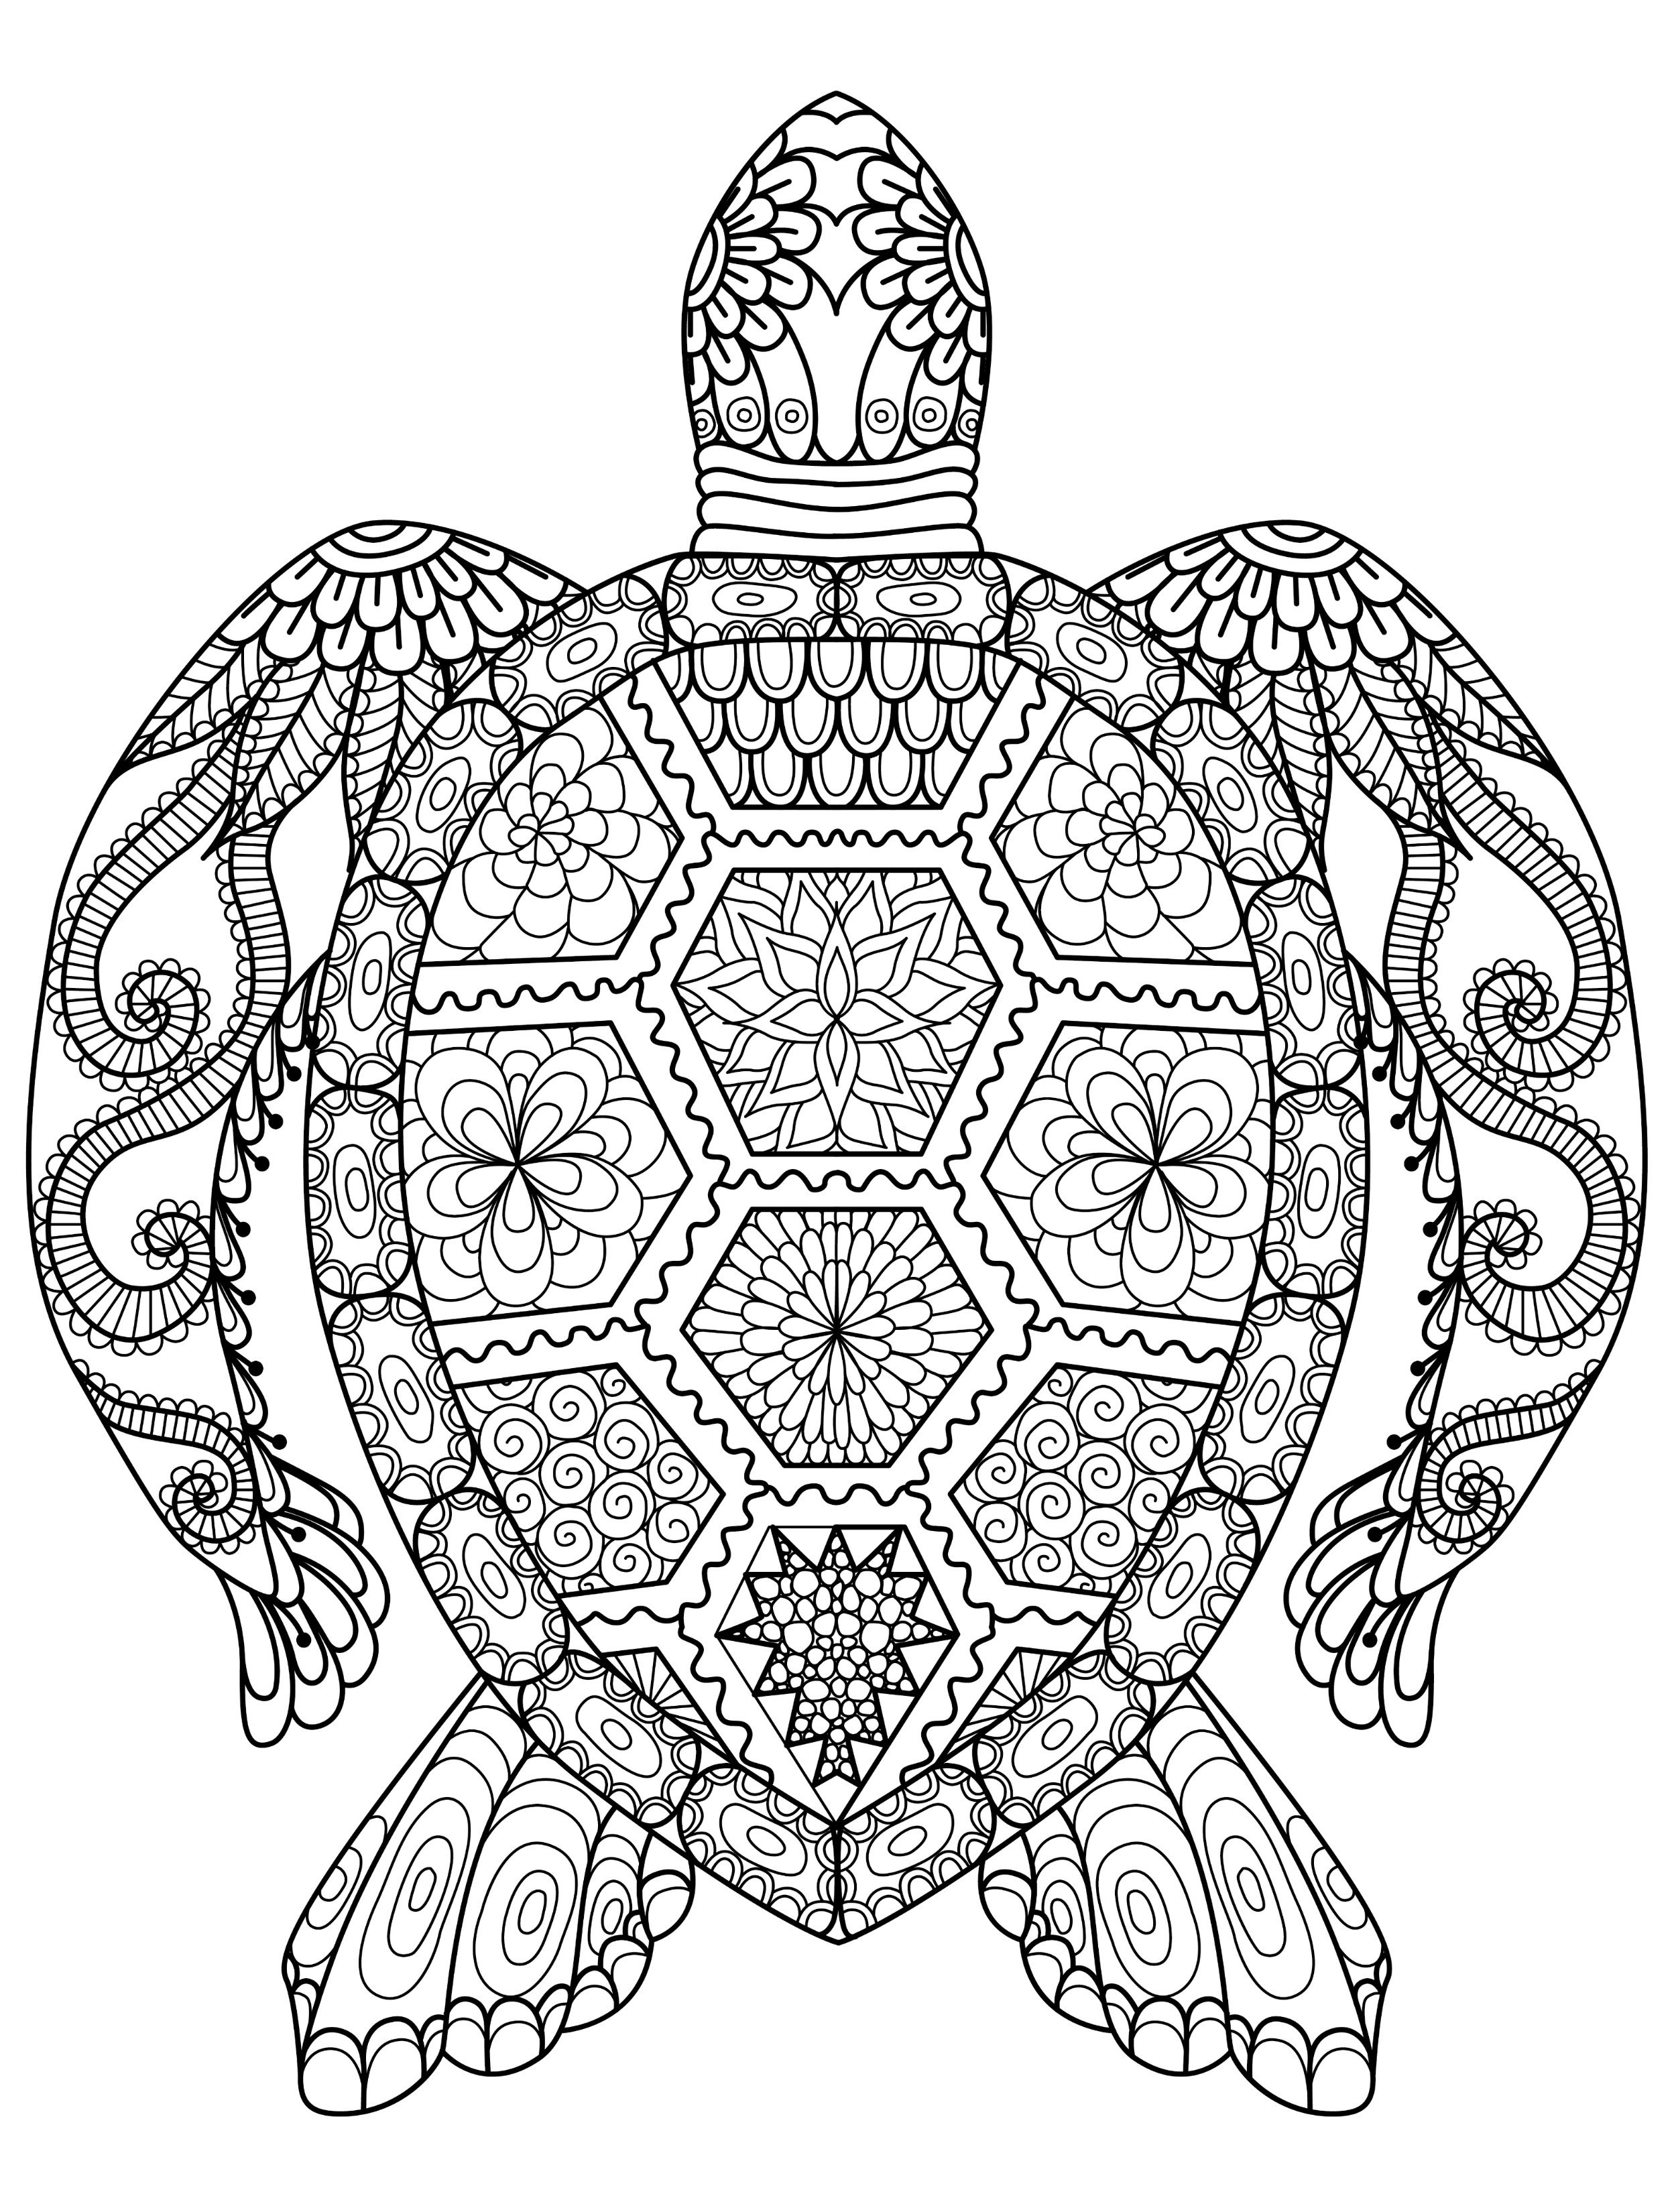 Animal Coloring Books for Adults Wallpaper